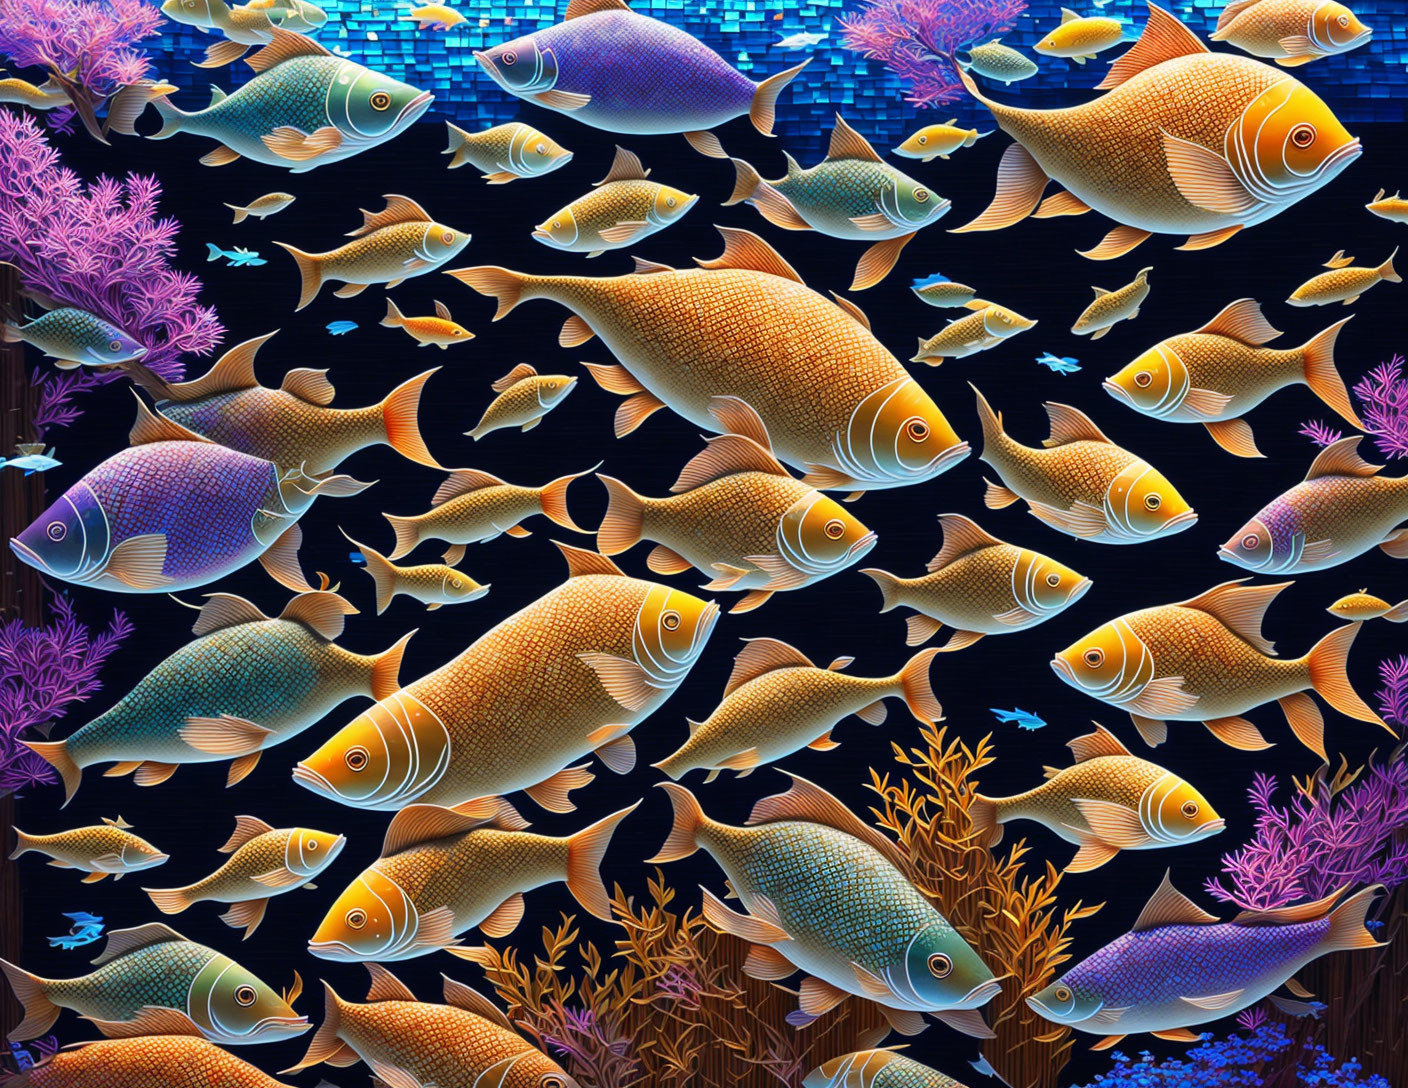 Vibrant fish swimming in coral with mosaic tile background